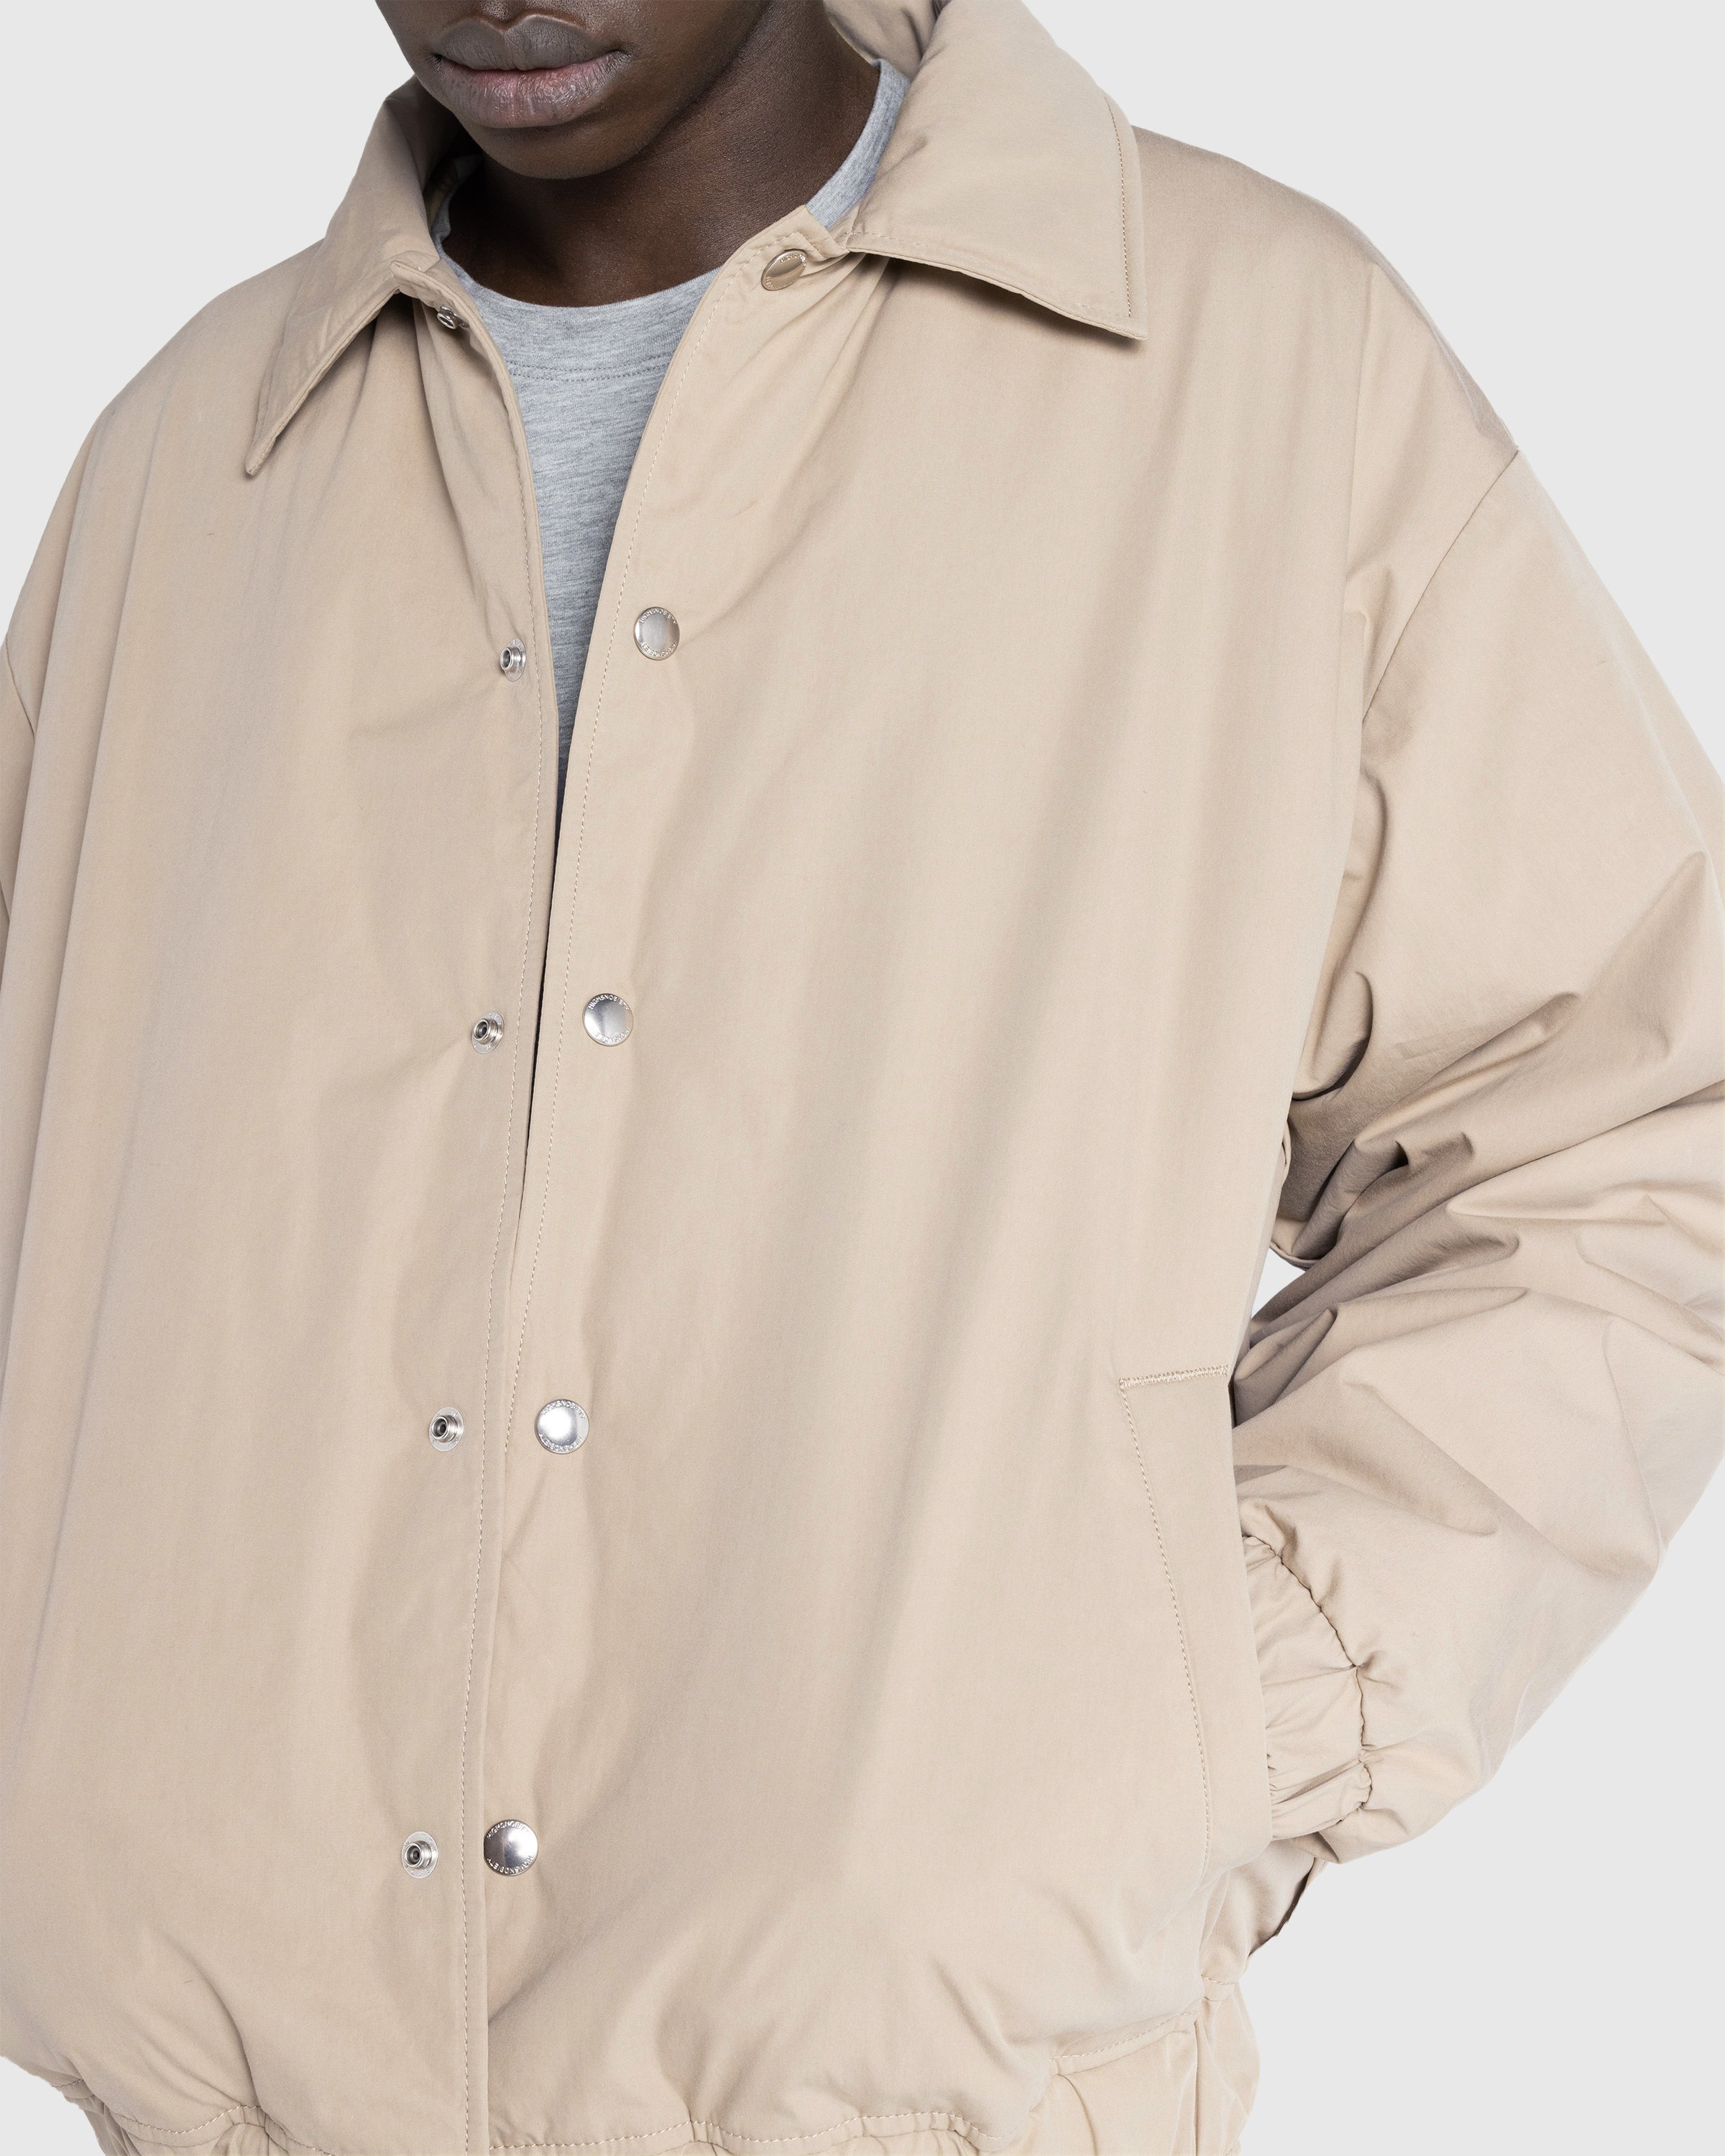 Highsnobiety HS05 - Reverse Piping Insulated Bomber - Clothing - Beige - Image 9